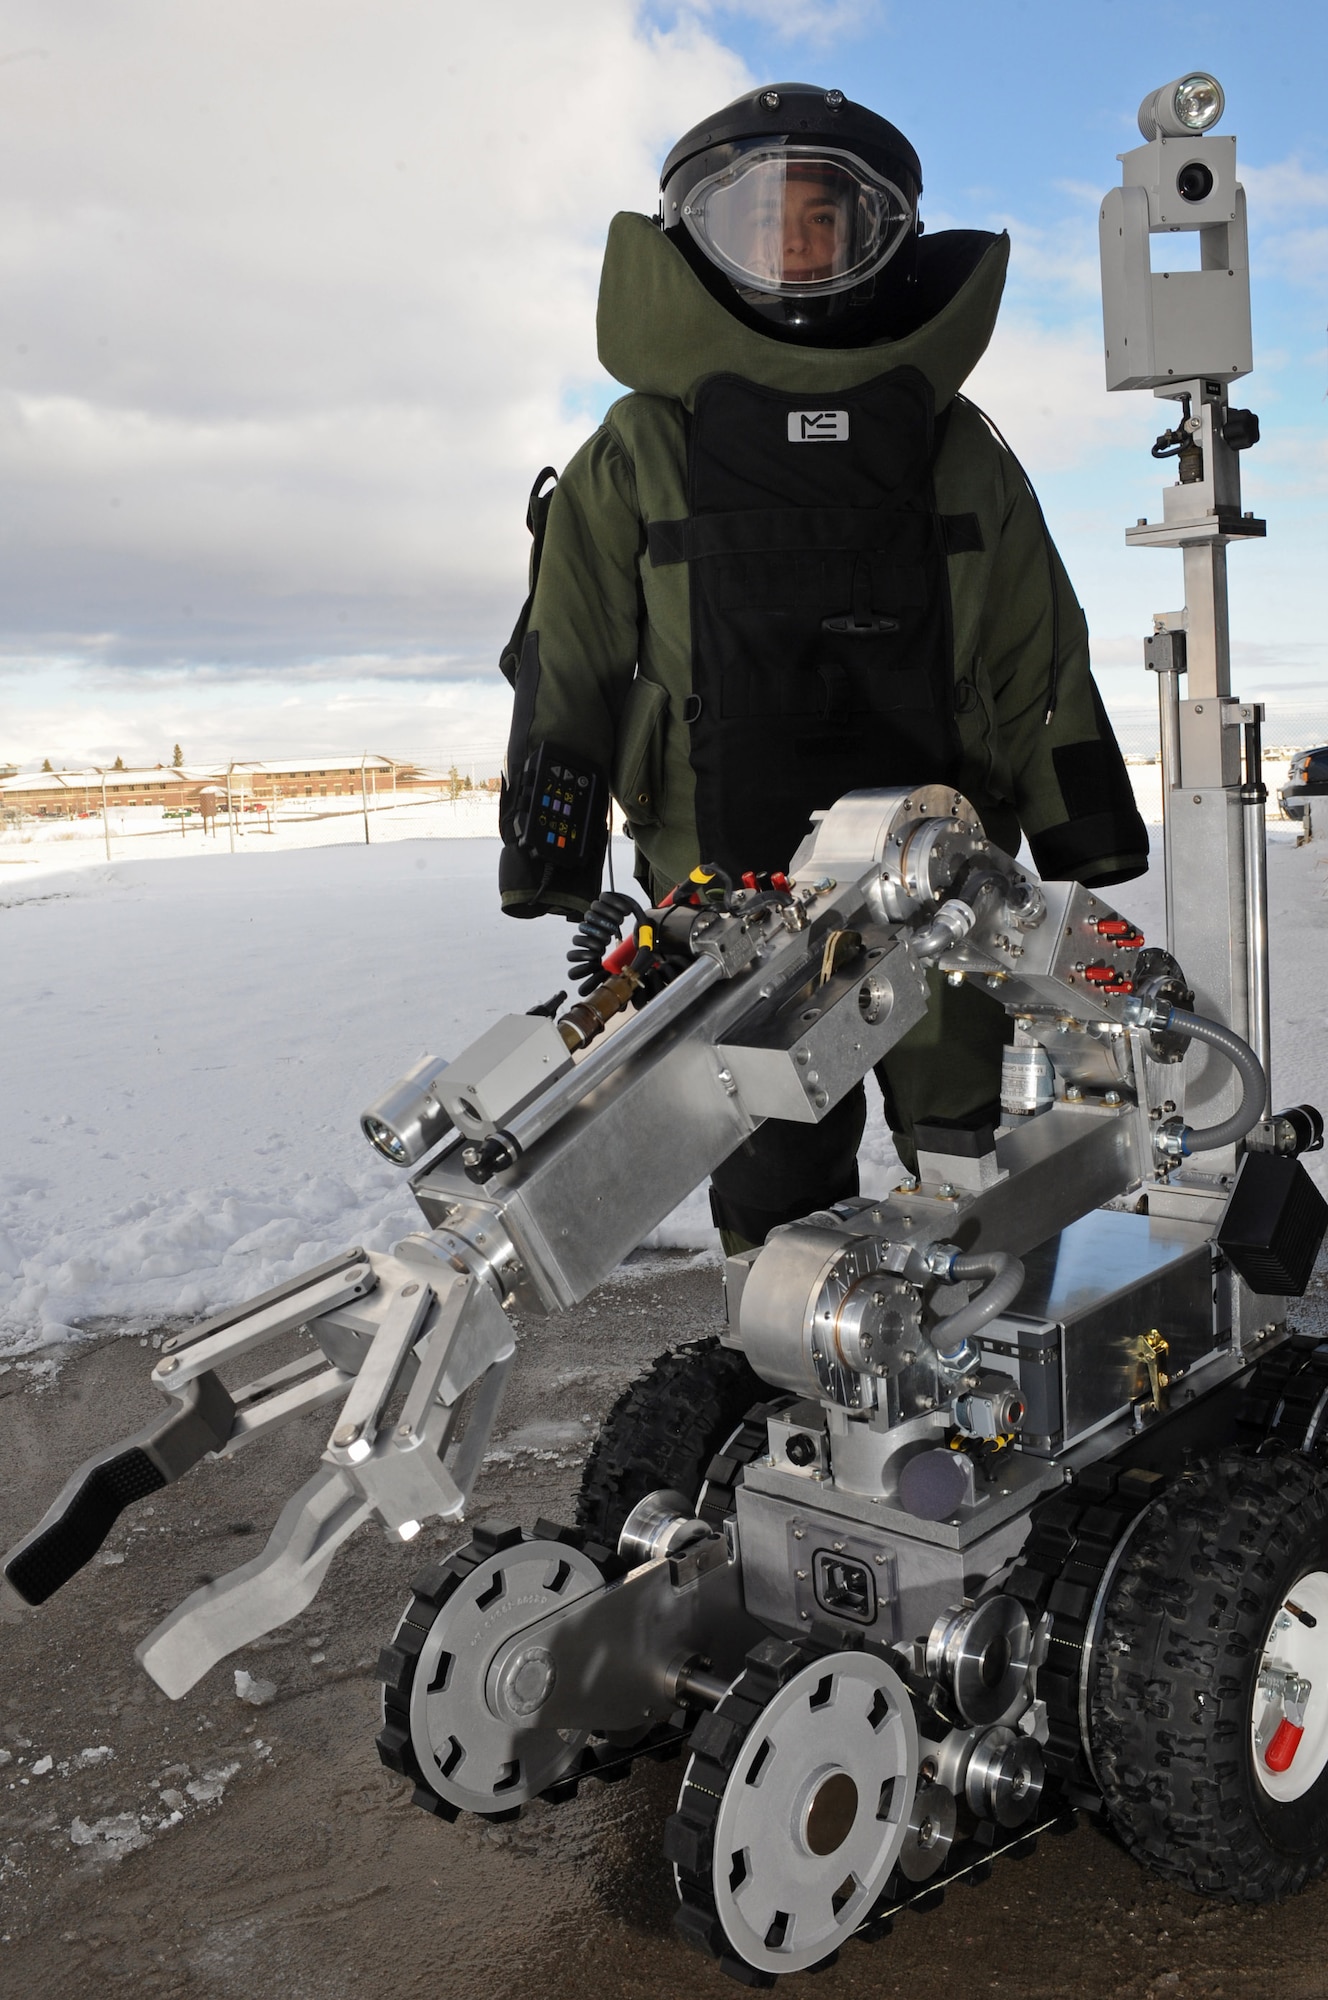 Senior Airman Alicia Goodner, 28th Civil Engineer Squadron Explosive Ordinance Disposal operator, stands beside a ANDROS F6A Robot here, Dec. 11. The robot is equipped with several television cameras for remote viewing and a dexterous arm for hazardous tasks. (US Air Force photo/Airman 1st Class Corey Hook)